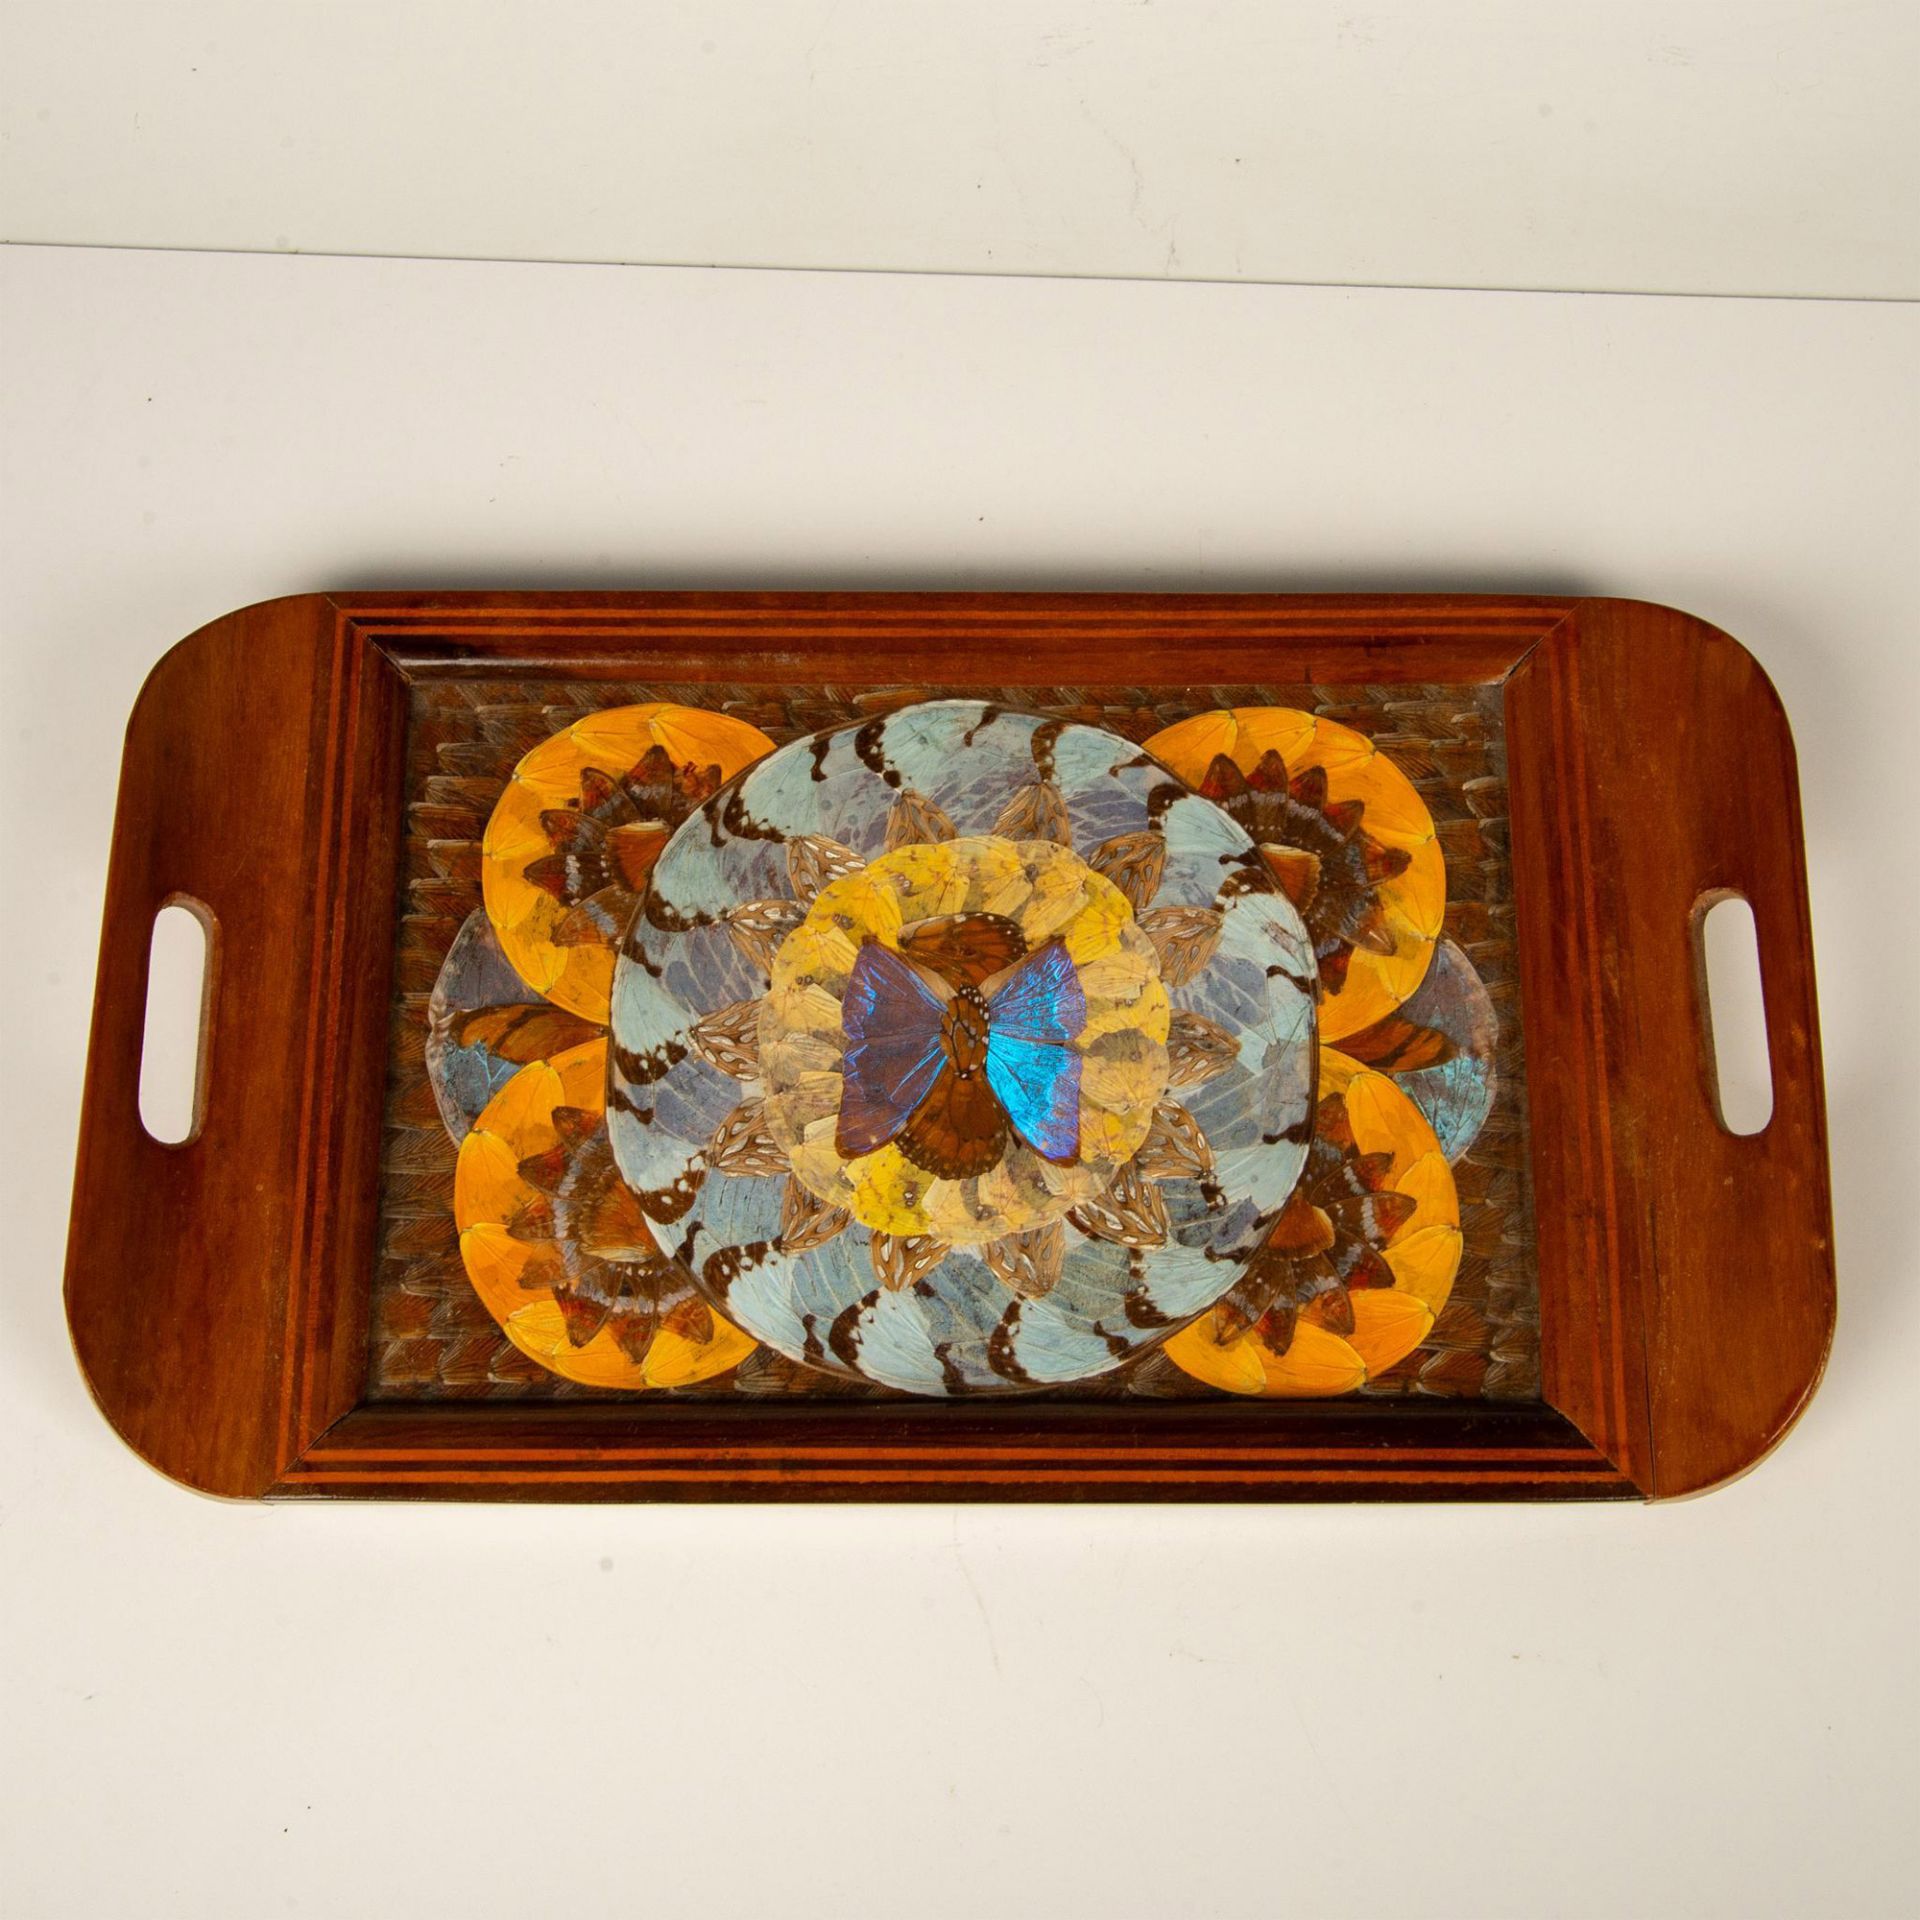 Butterfly Wing Art Inlaid Wood Tray - Image 2 of 3